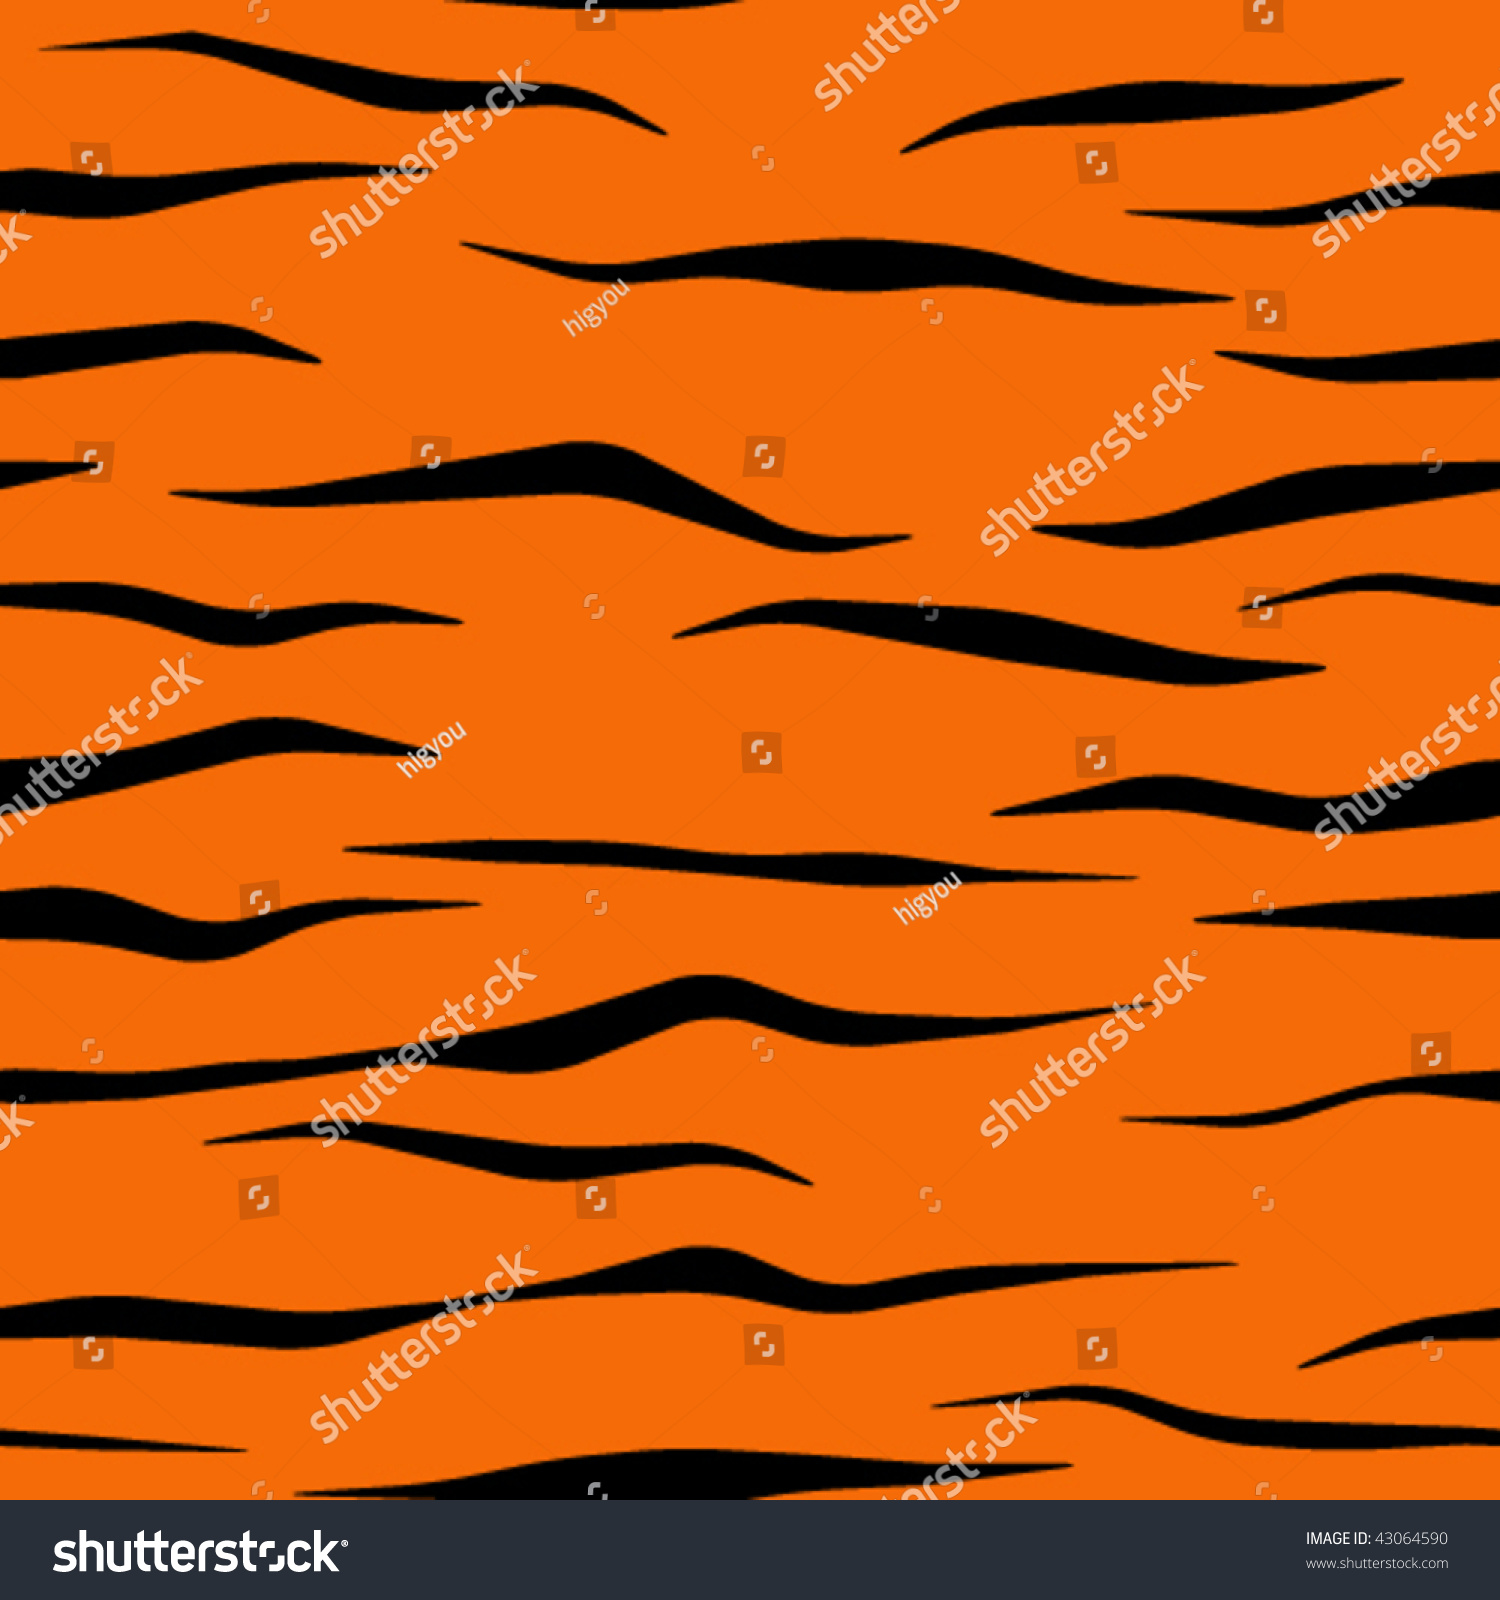 Seamless Tile Vector Texture Pattern, Tiger Stripes - 43064590 ...